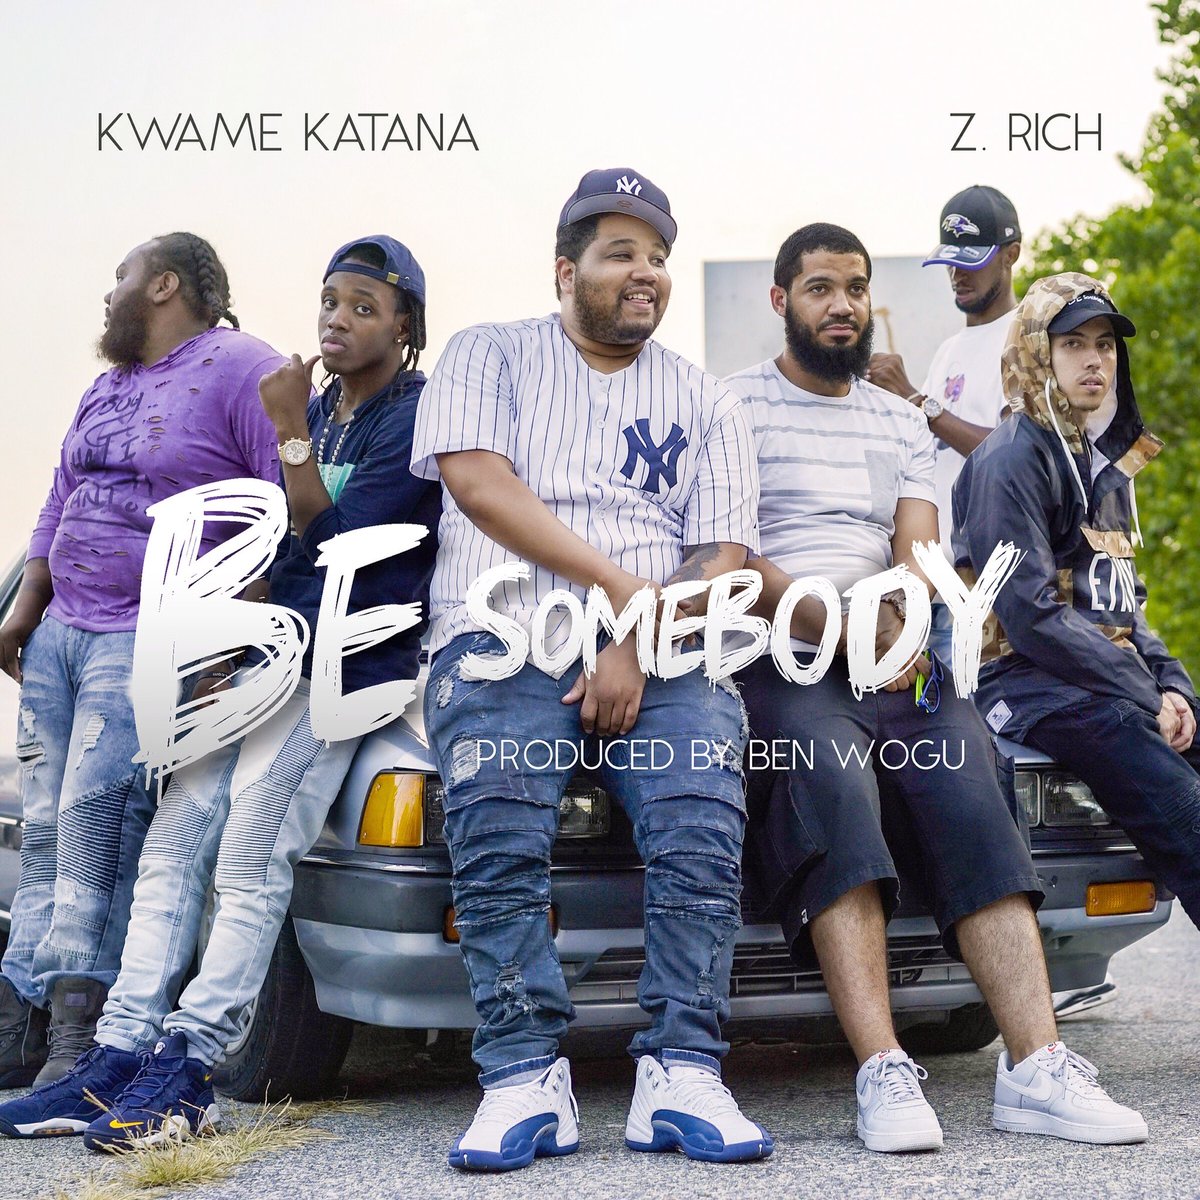 Watch “Be Somebody” By Kwame Katana Feat. Z. Rich (VIDEO)